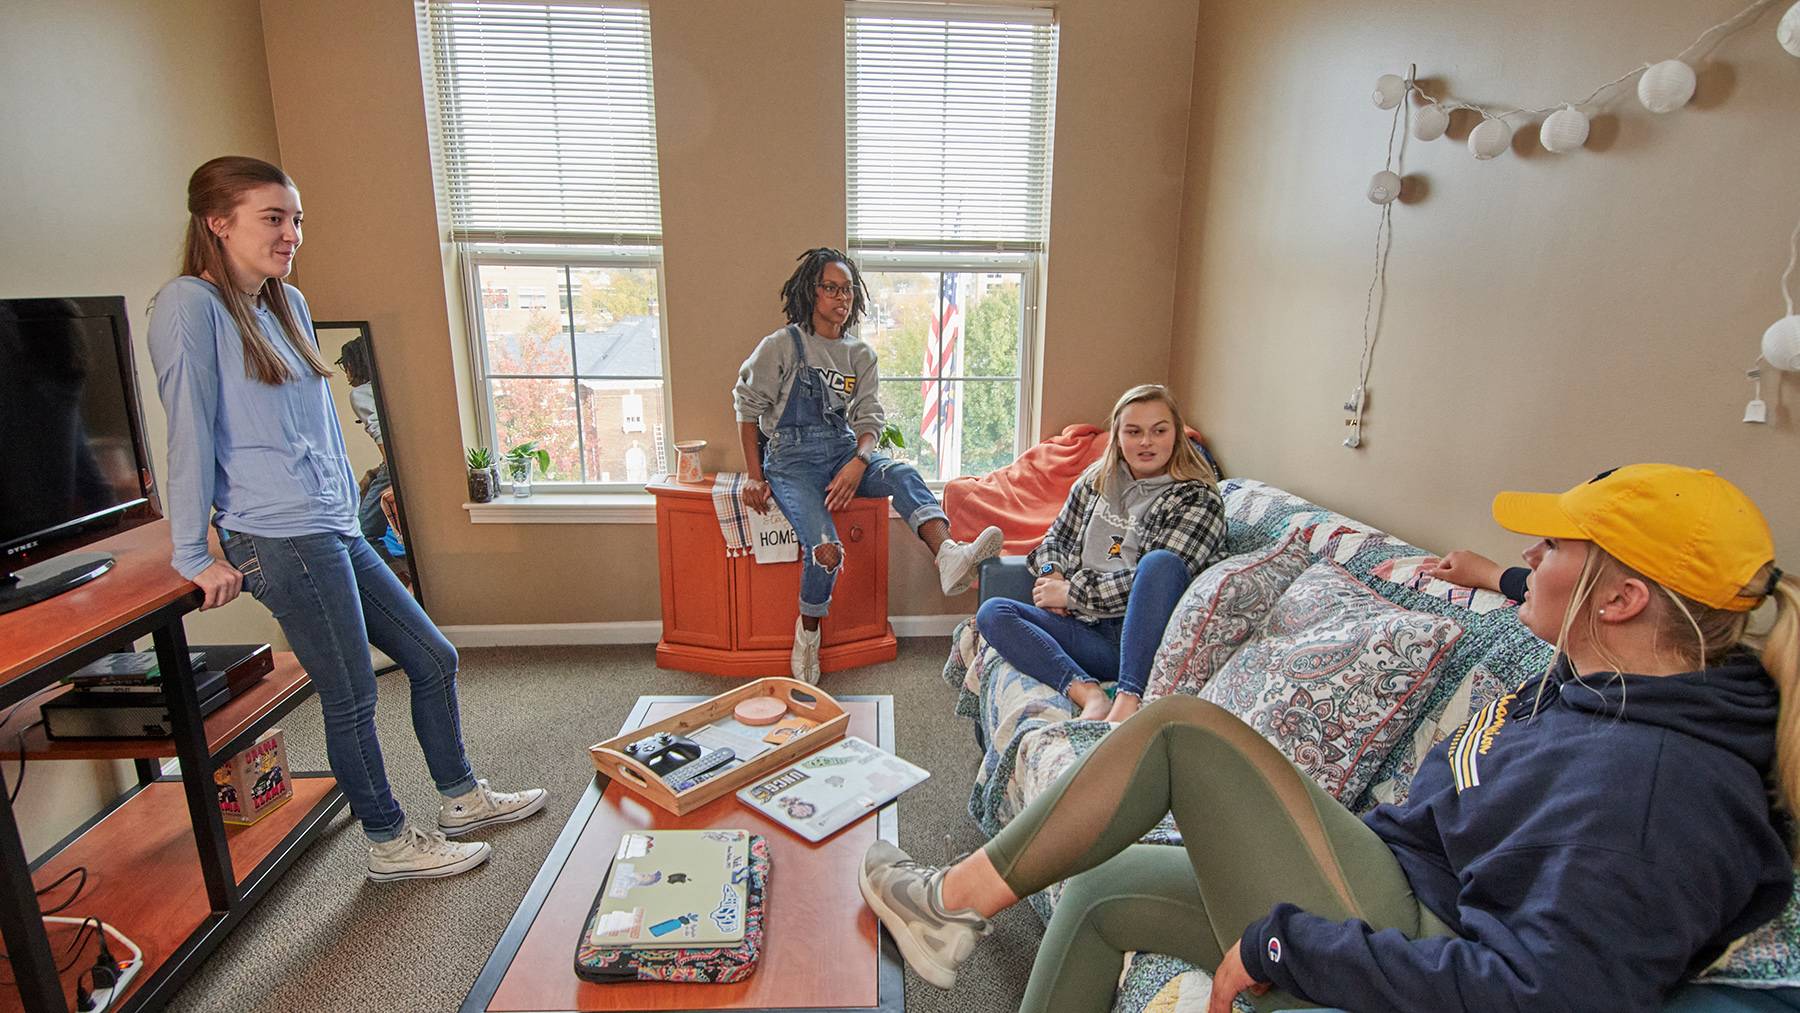 Four female UNCG students lounge in the living room of their Spring Garden Apartments suite.